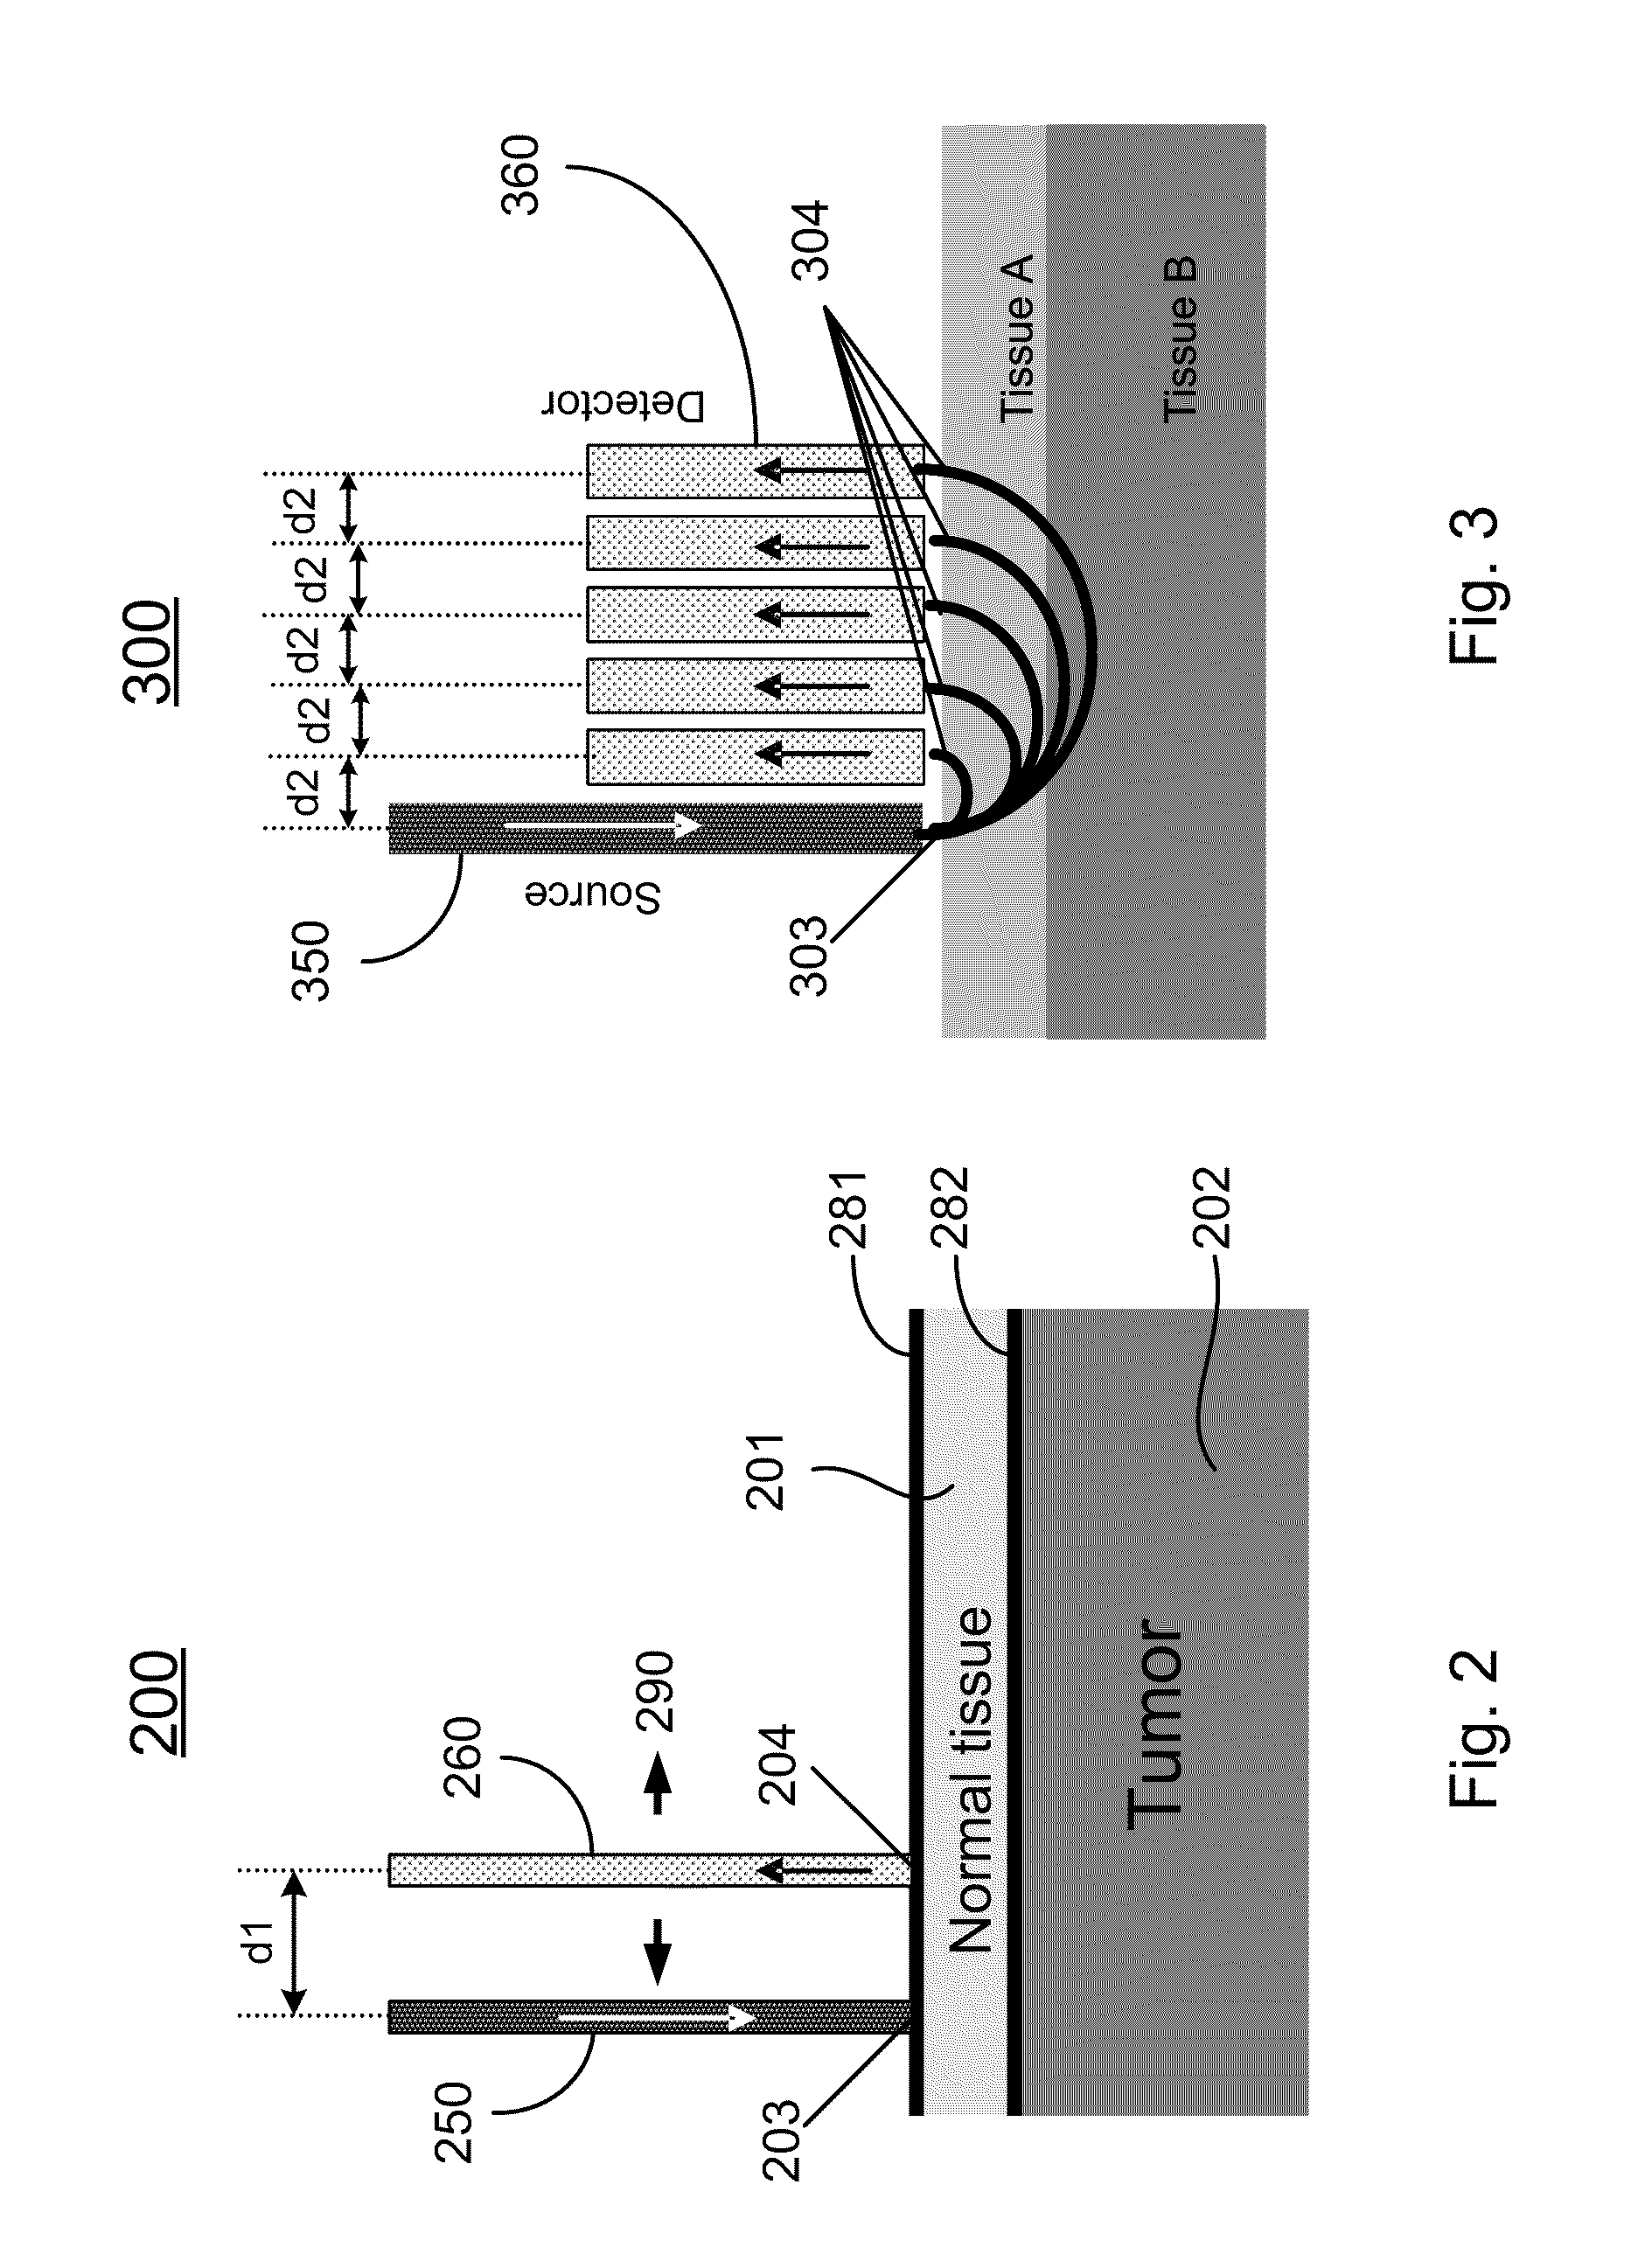 Spatially offset Raman spectroscopy of layered soft tissues and applications of same